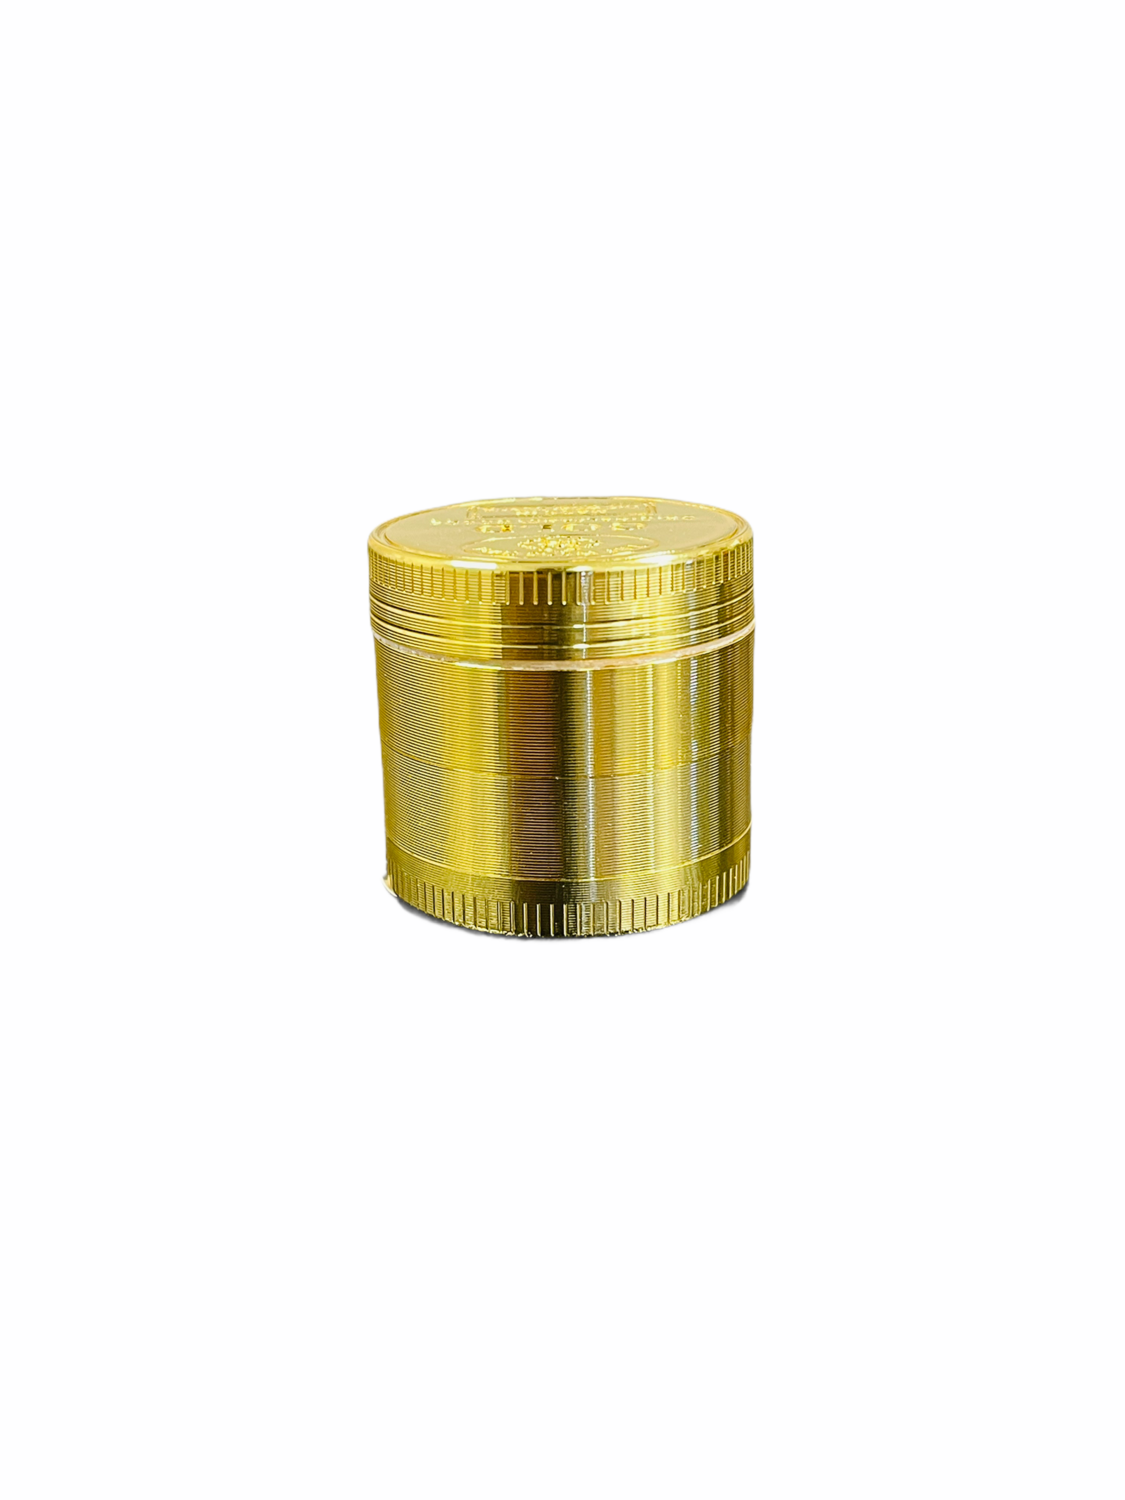 Stainless Steel Gold Finish Metal Grinder